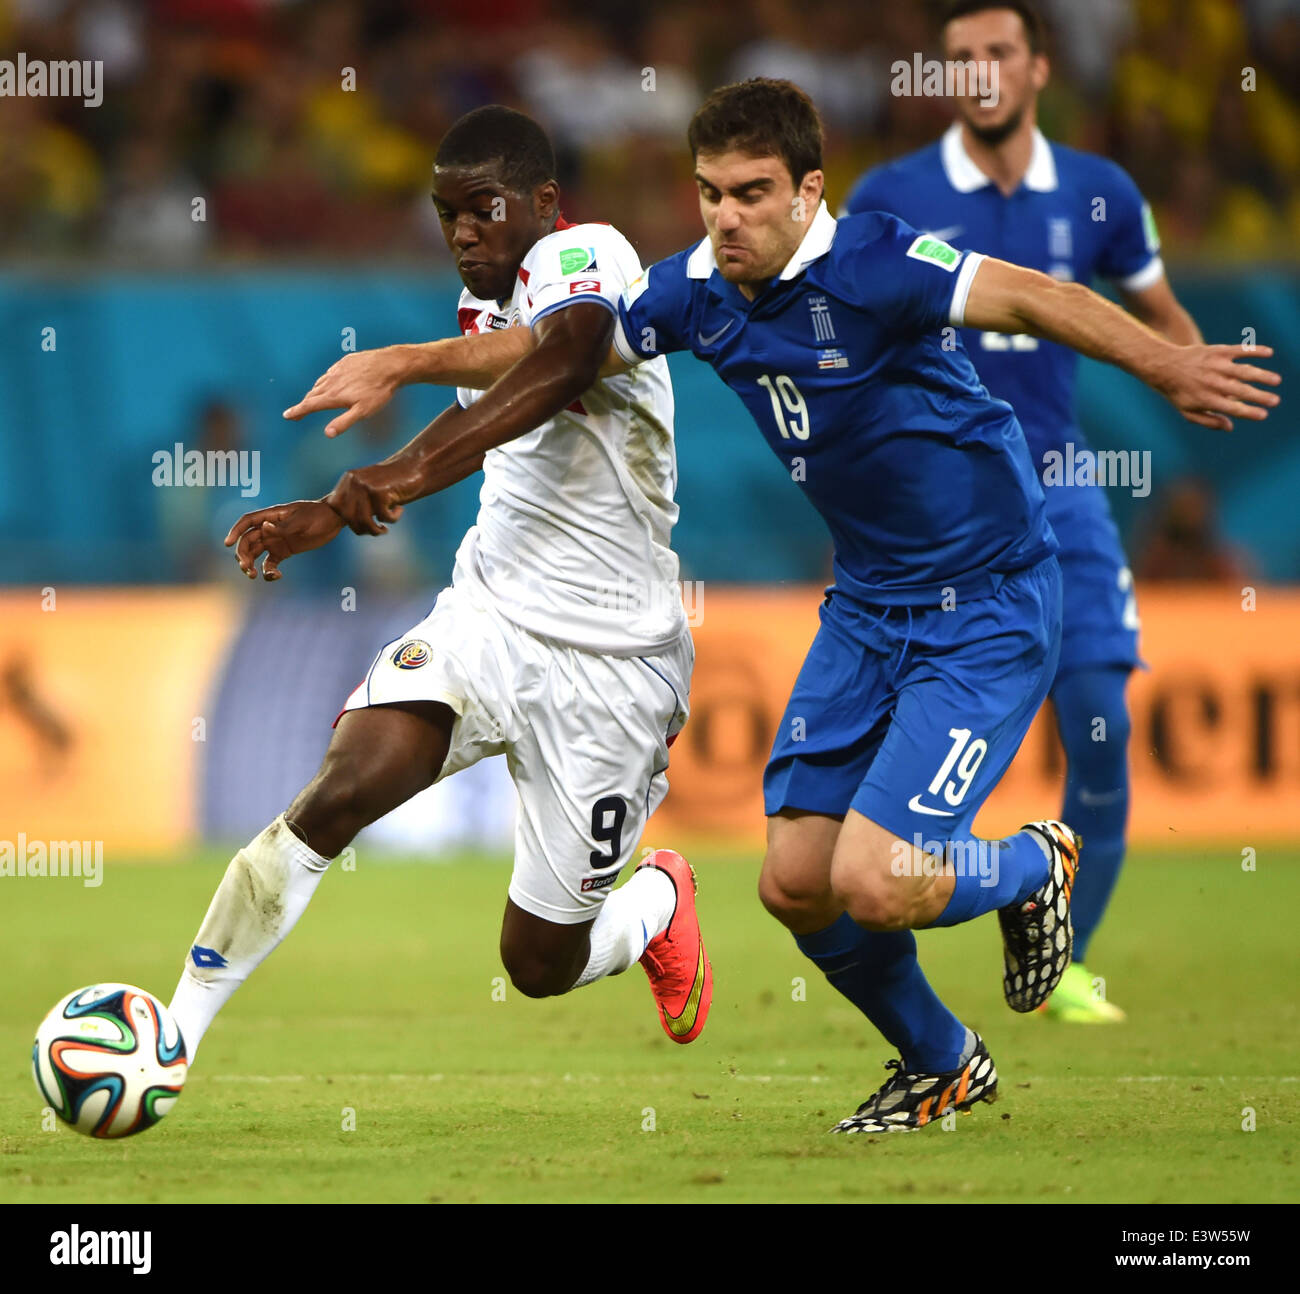 Recife, Brazil. 29th June, 2014. Costa Rica's Joel Campbell vies with Greece's Sokratis Papastathopoulos during a Round of 16 match between Costa Rica and Greece of 2014 FIFA World Cup at the Arena Pernambuco Stadium in Recife, Brazil, on June 29, 2014. Credit:  Guo Yong/Xinhua/Alamy Live News Stock Photo